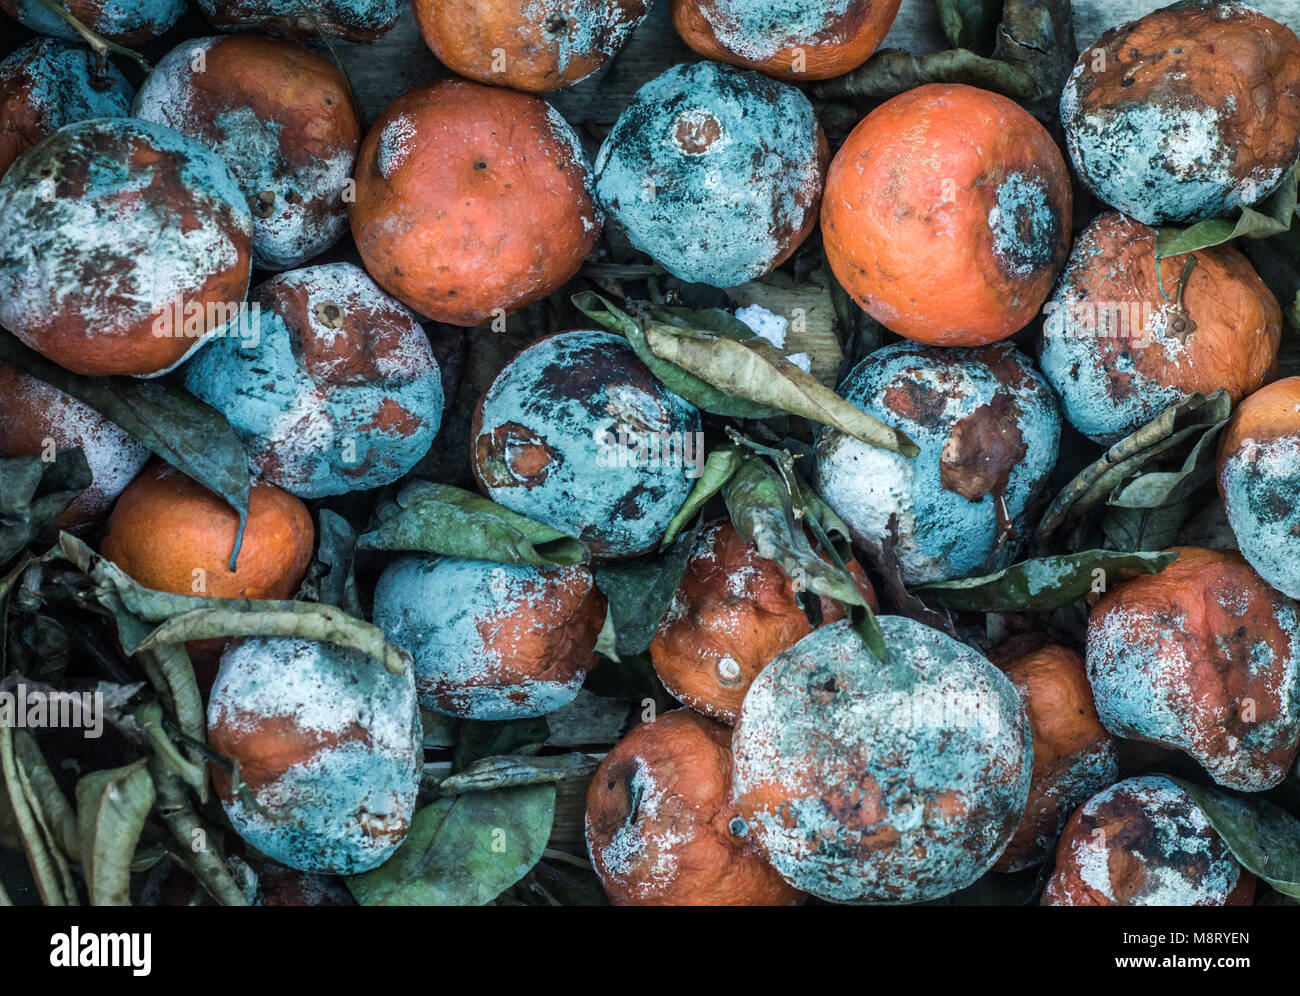 Abstract Background Food Waste Texture Of Rotting Oranges Stock Photo